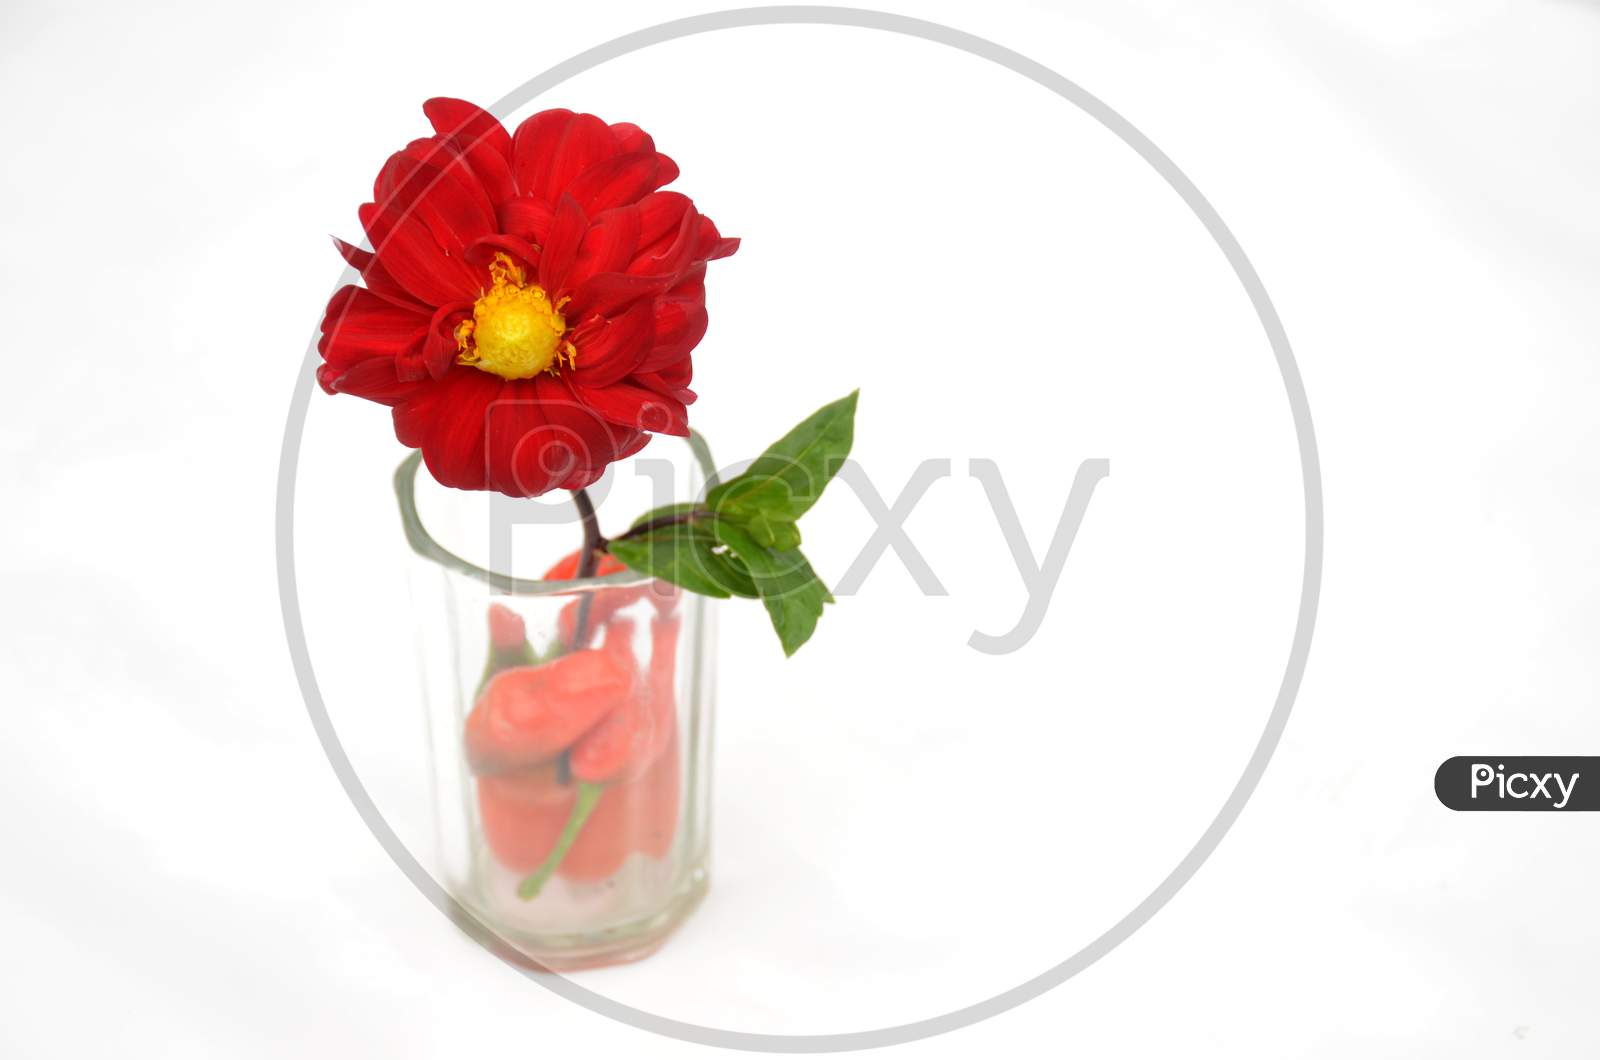 The Beautiful Red Dahlia Flower With Leaf In The Glass Isolated On White Background.